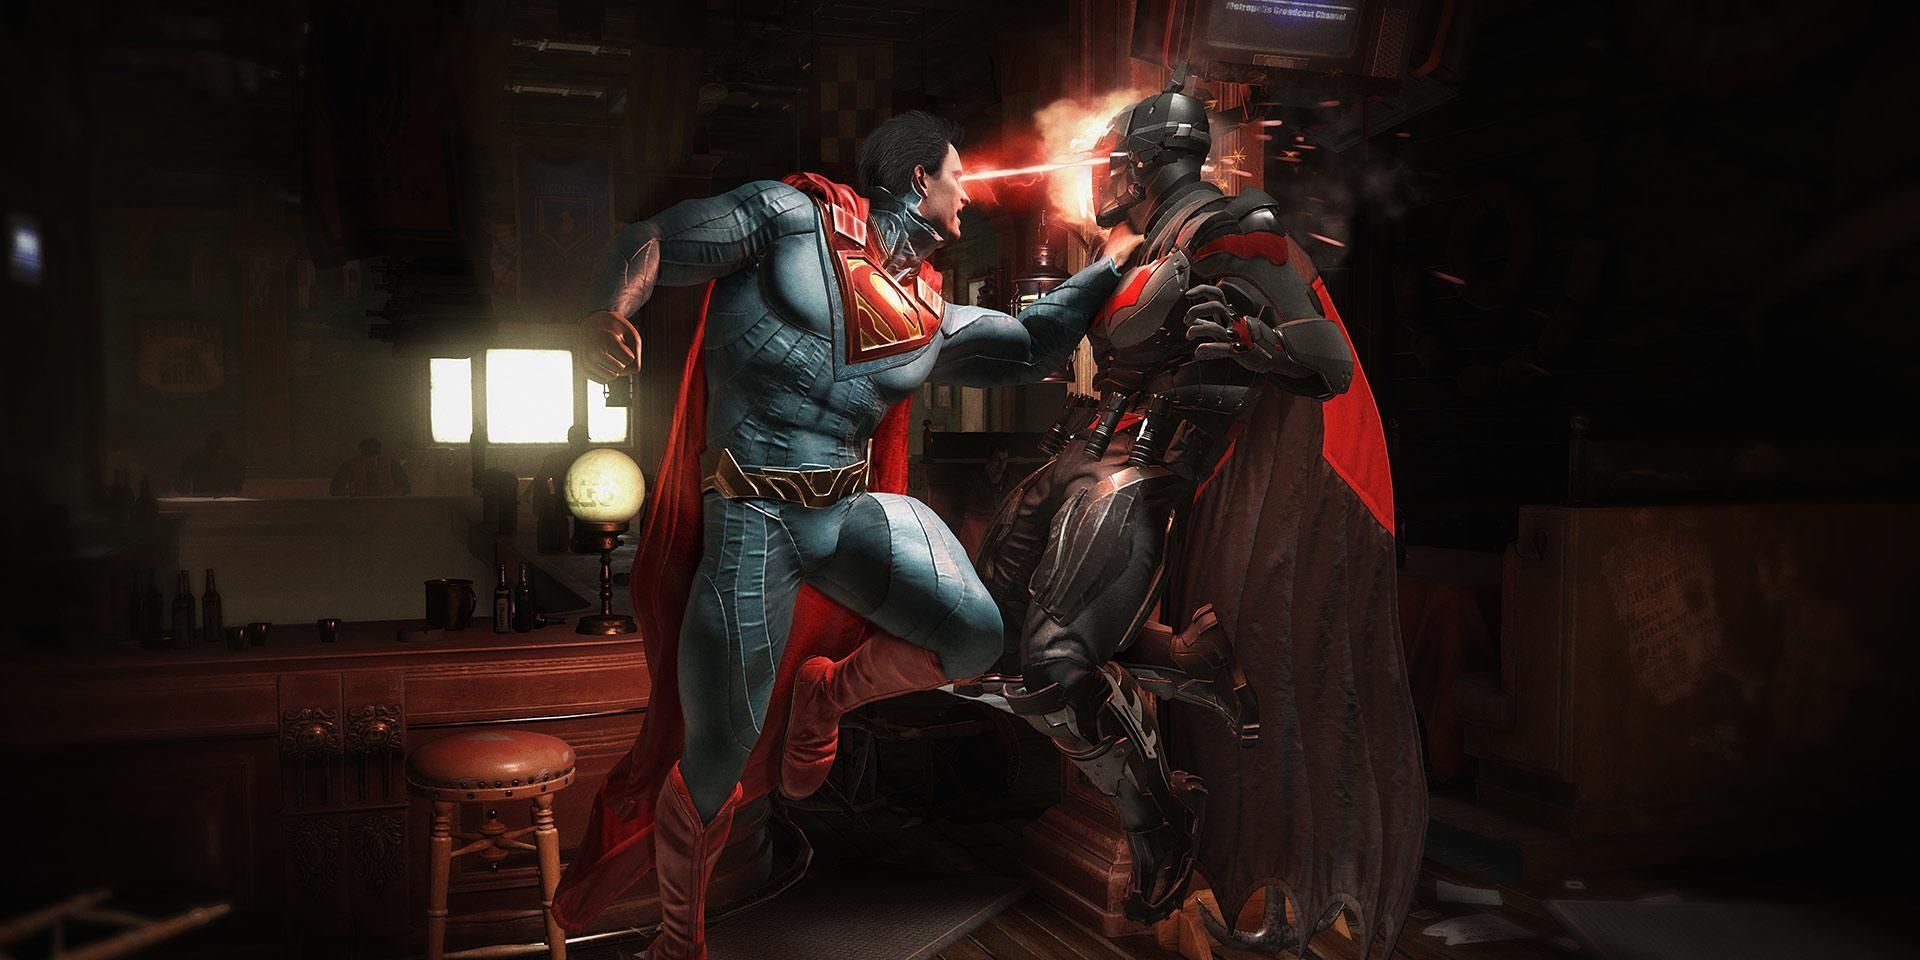 Batman and Superman fighting in the video game series Injustice.